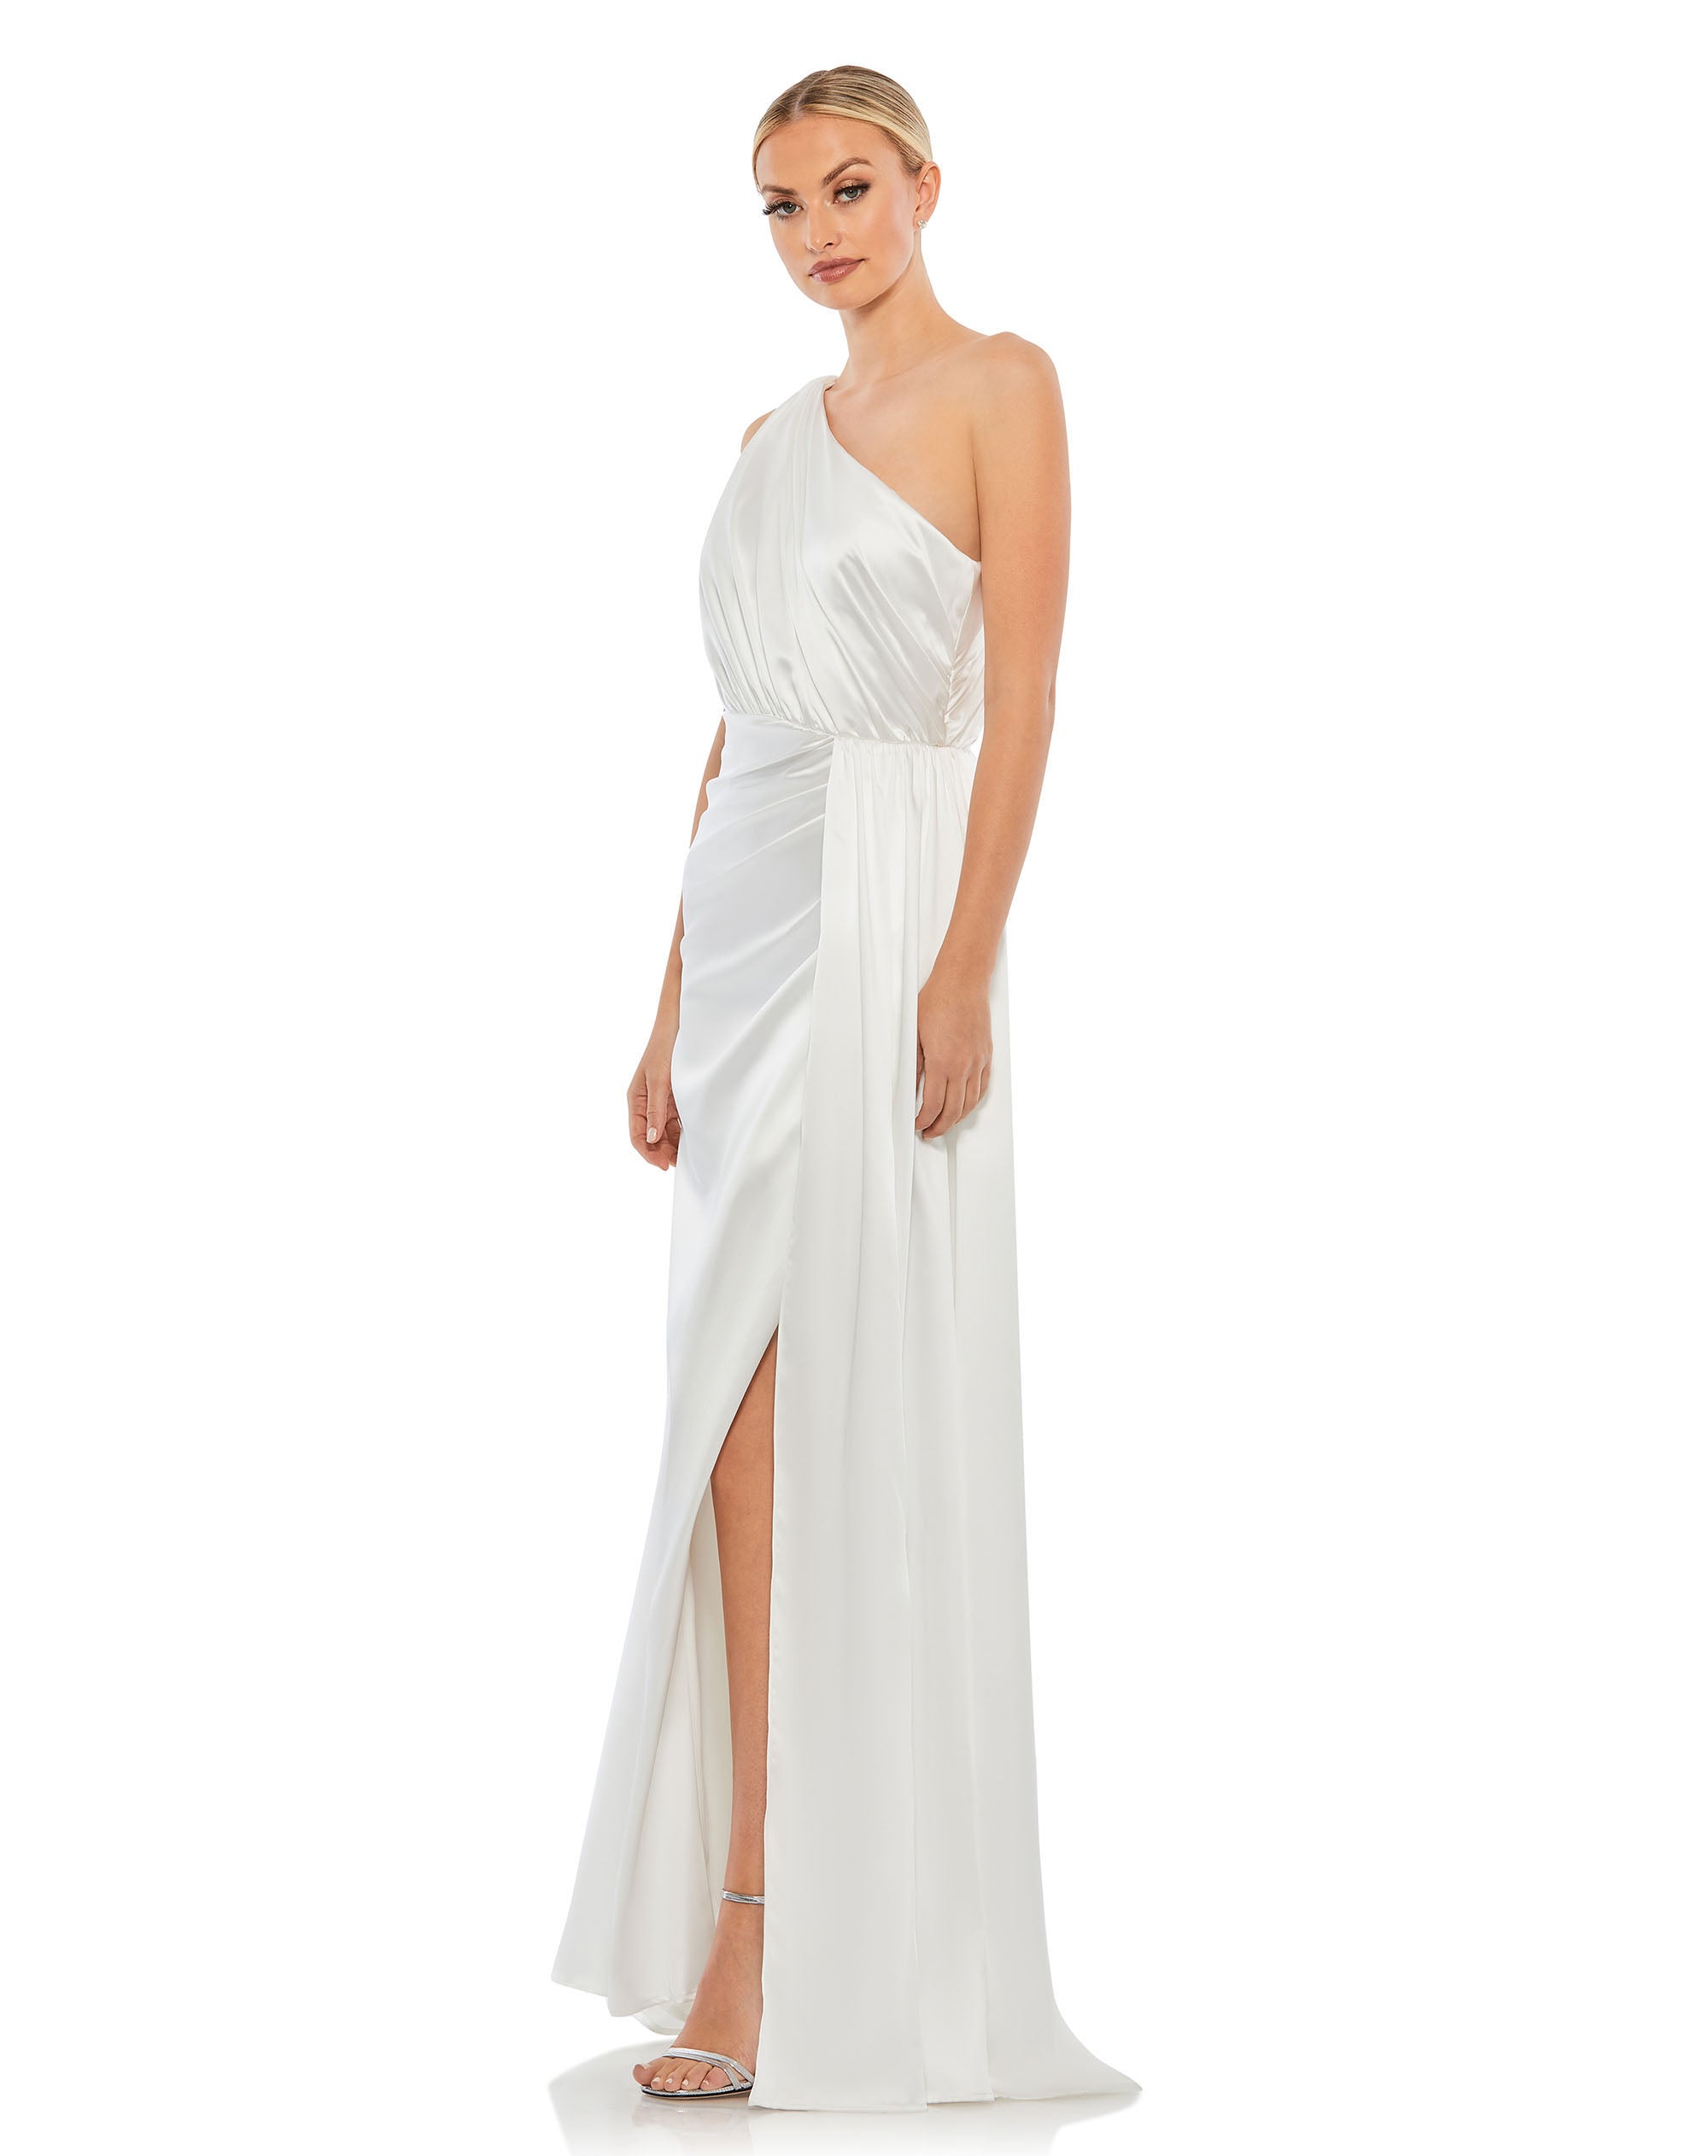 Gathered One Shoulder Satin Faux Wrap Gown - FINAL SALE